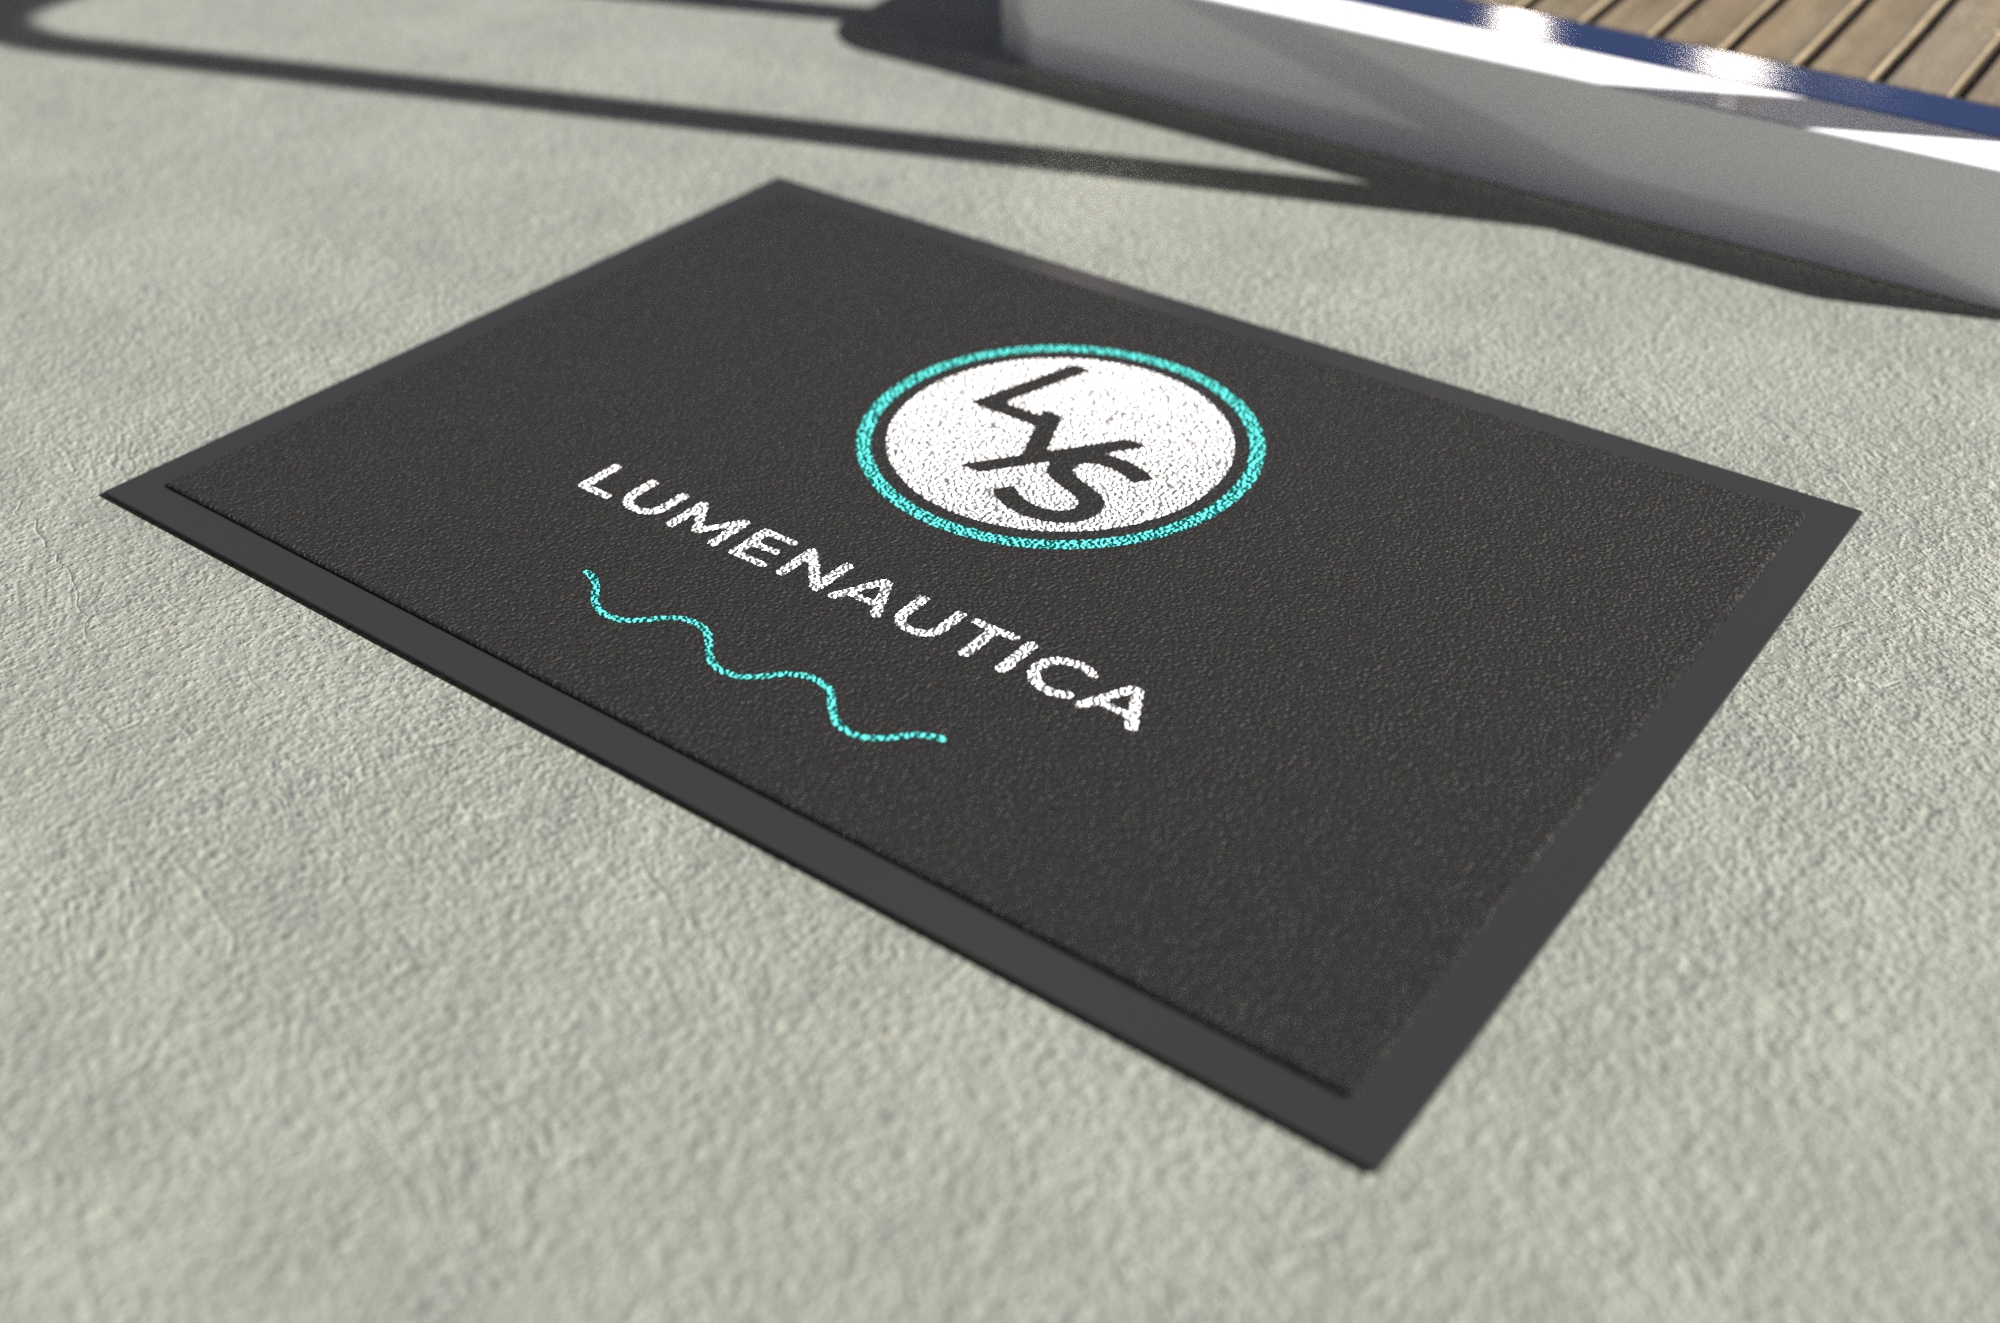 A bespoke boat mat for a superyacht